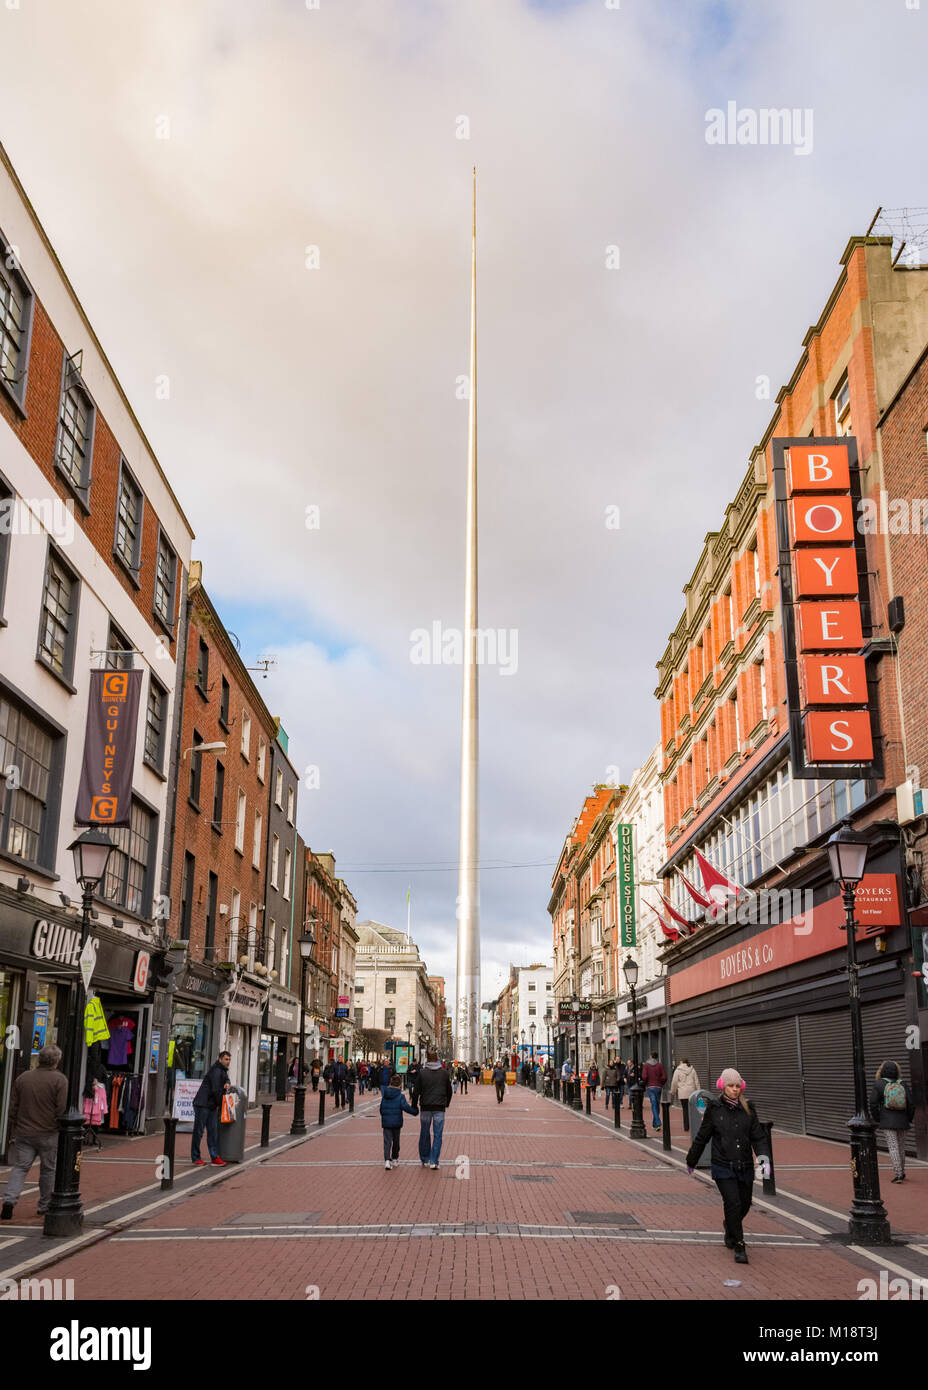 The Spire of Dublin, or Monument of Lights as seen from Earl Street North, Dublin, Ireland Stock Photo